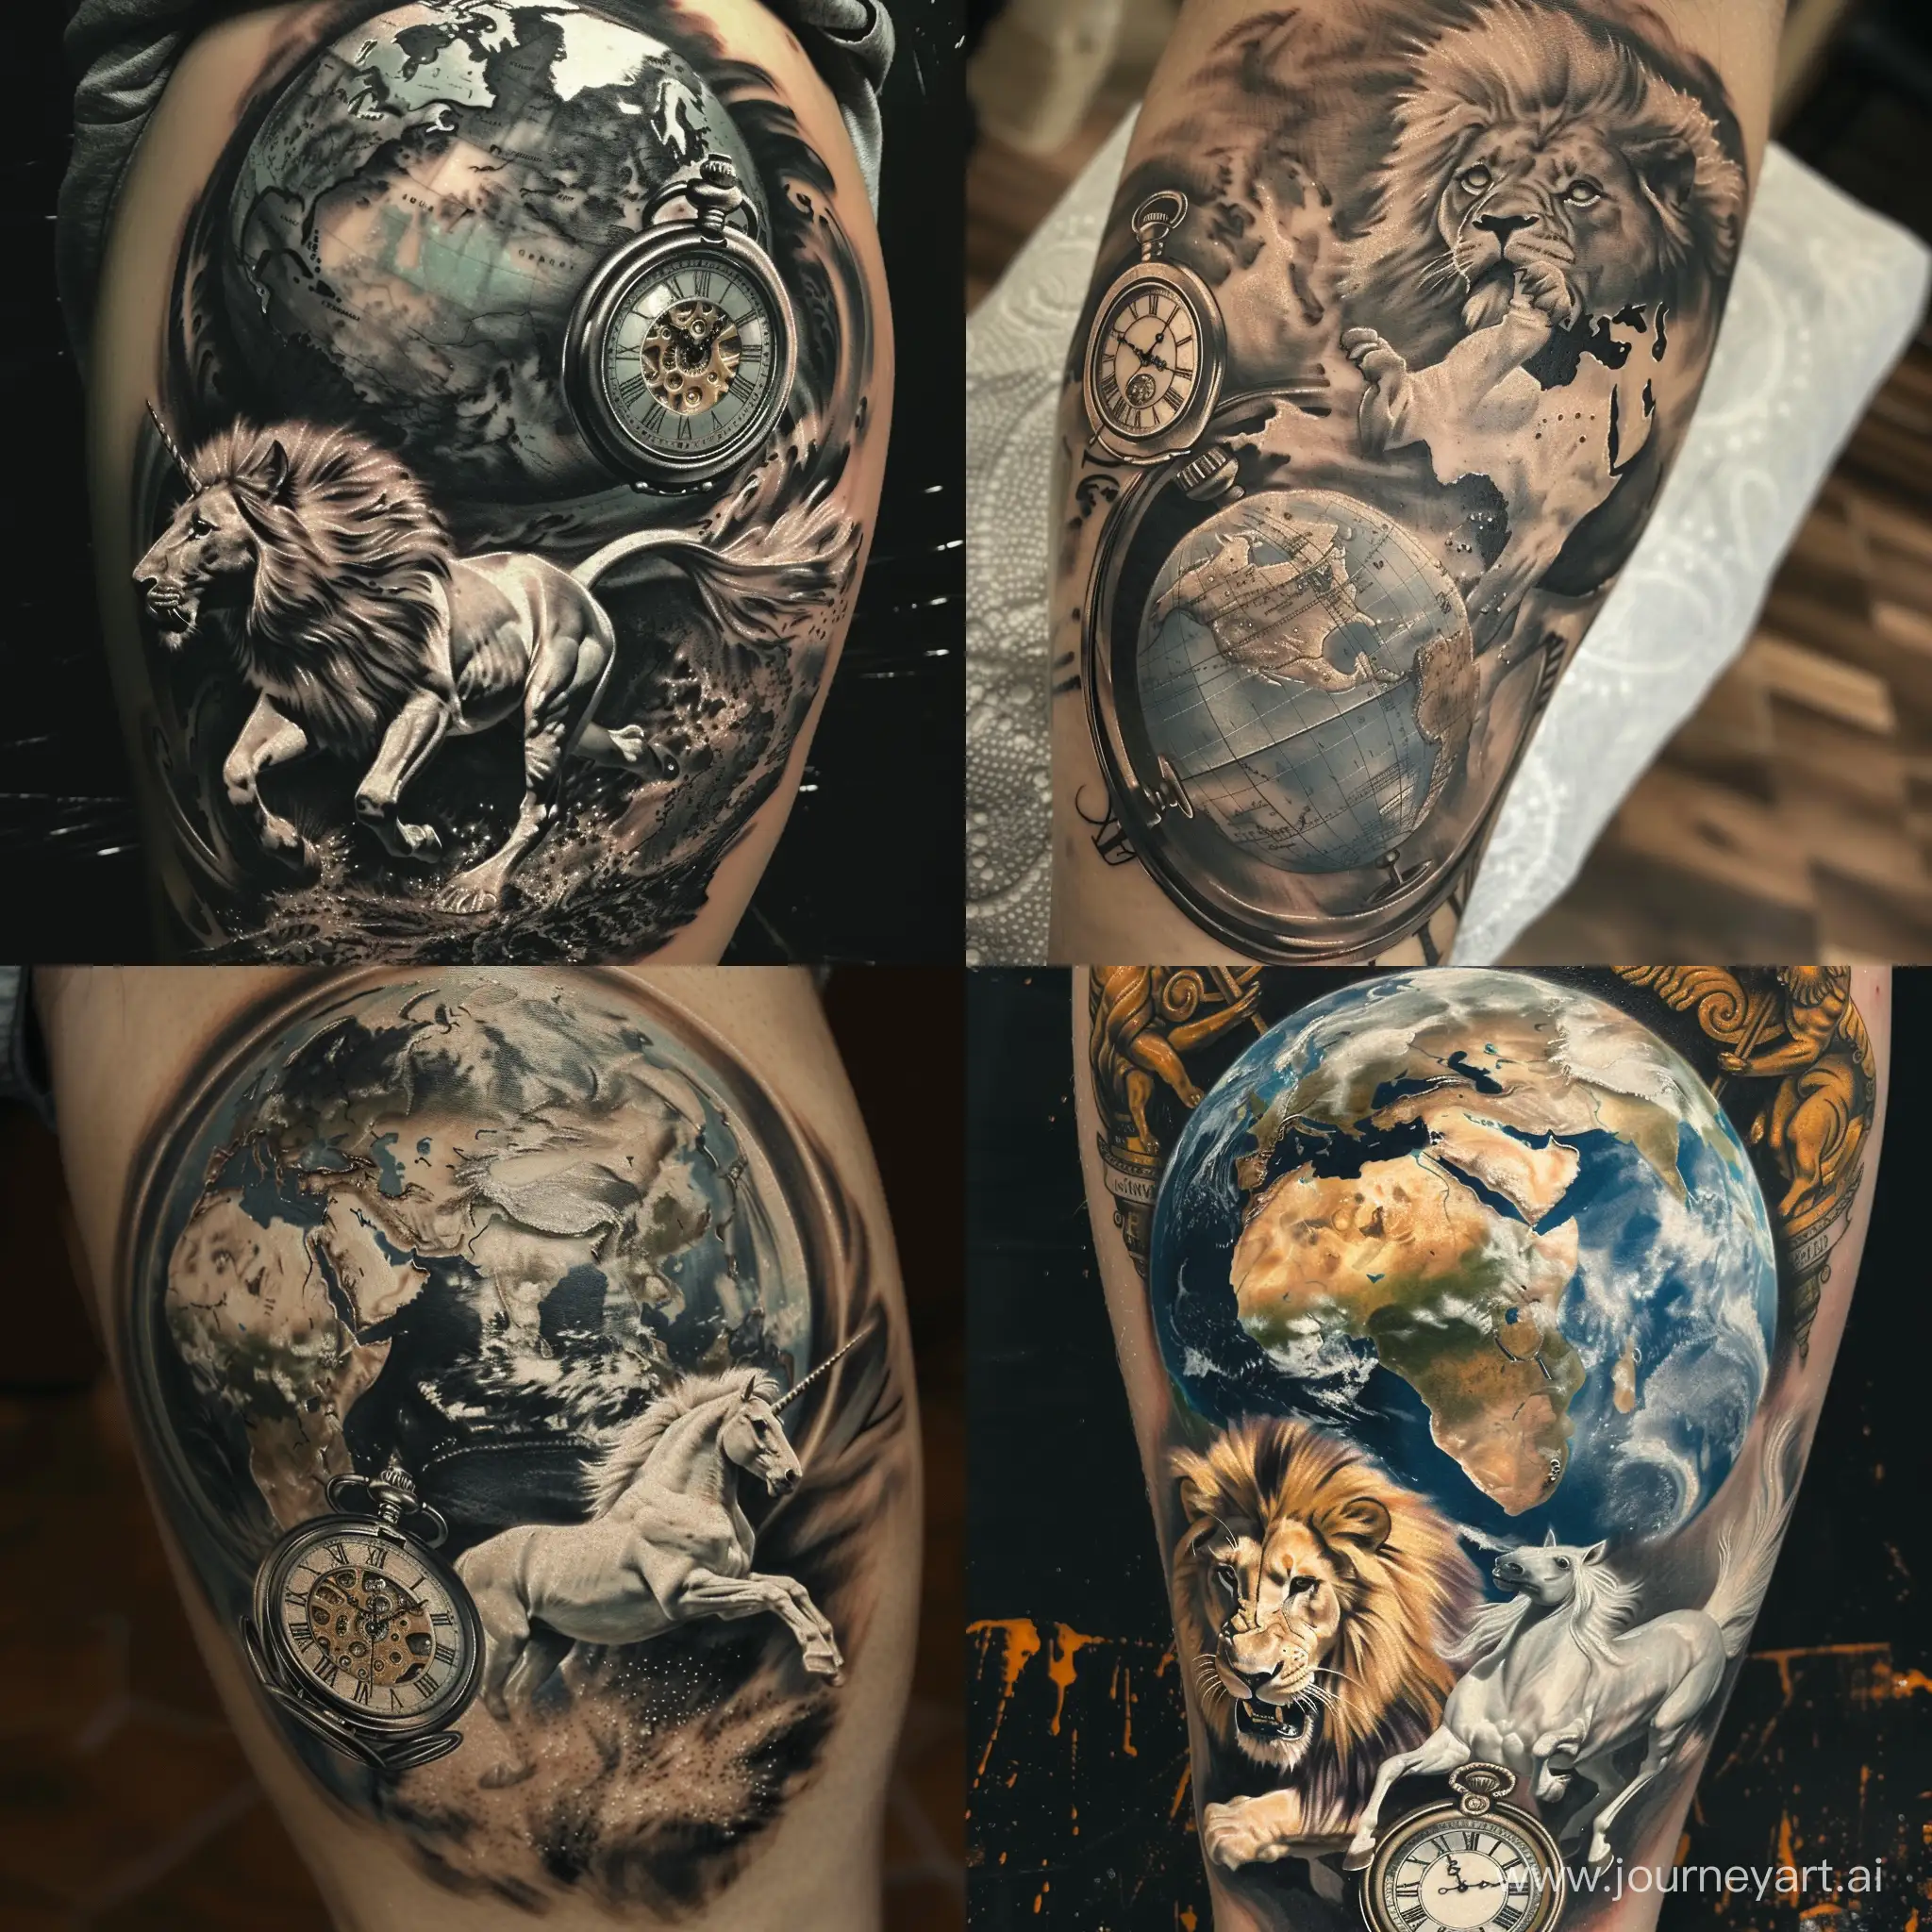 A realism tattoo, globe of the world, a lion, a white horse running towards me, an antique pocket watch